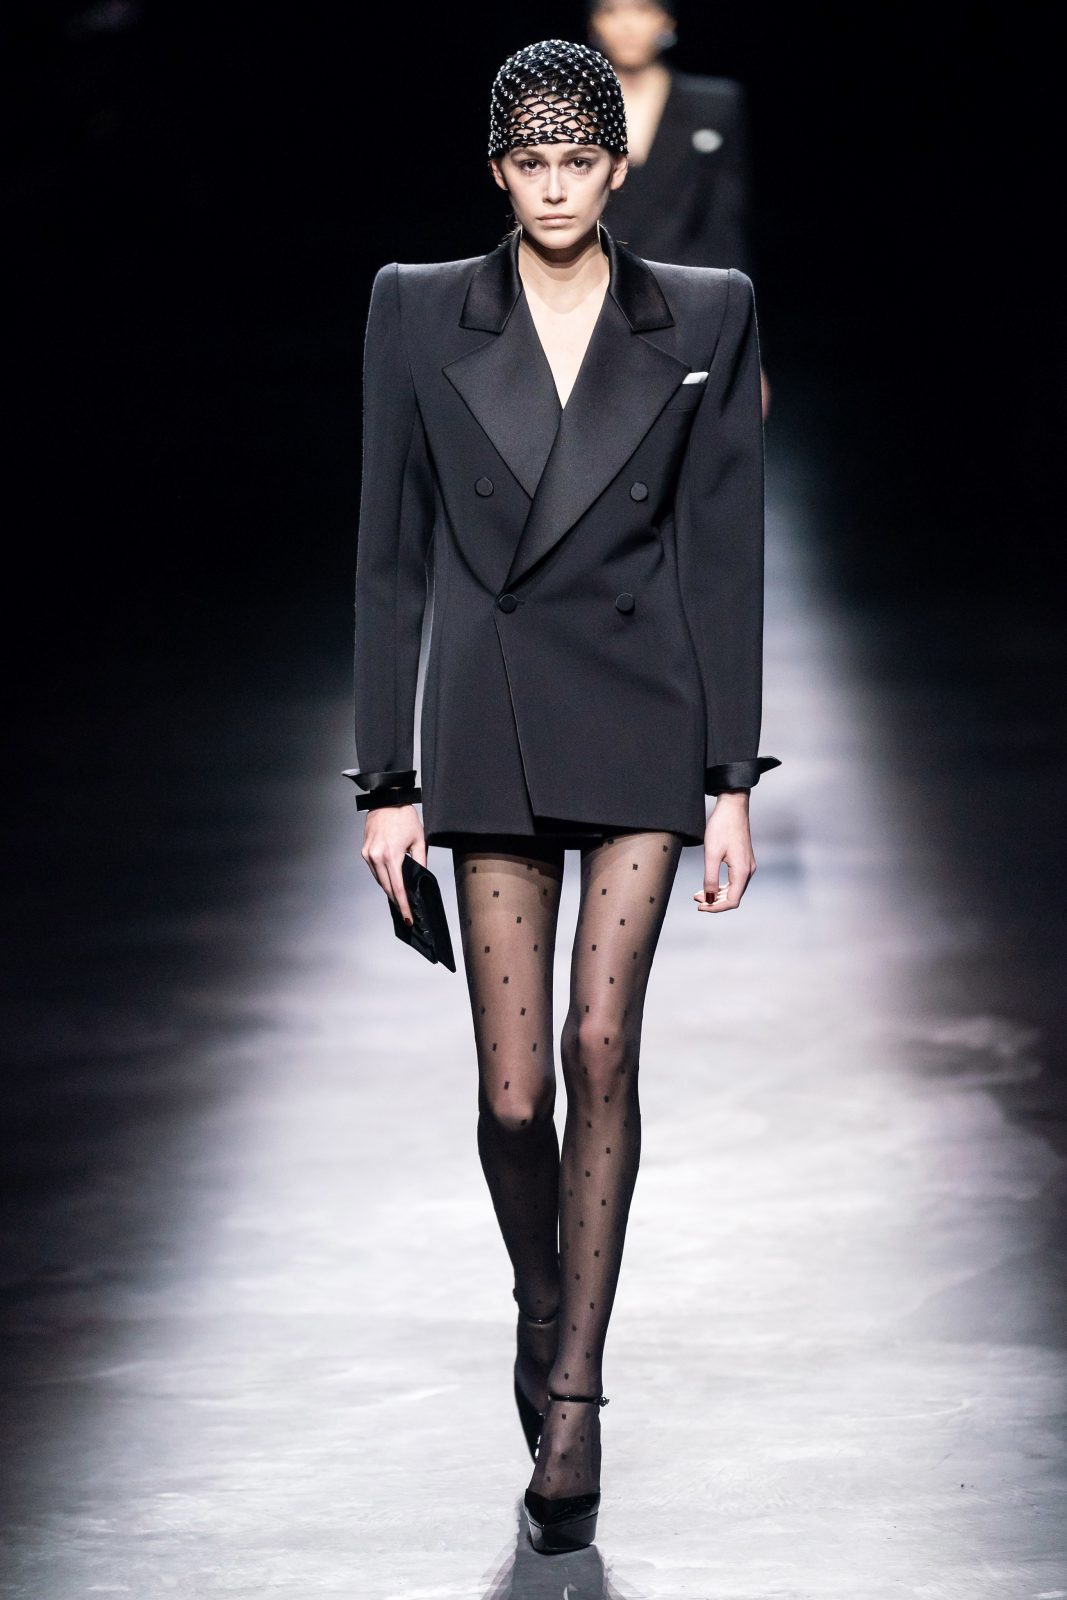 morbiditet Tahiti Lilla Women's Tailored Suits From The A/W19 Catwalk